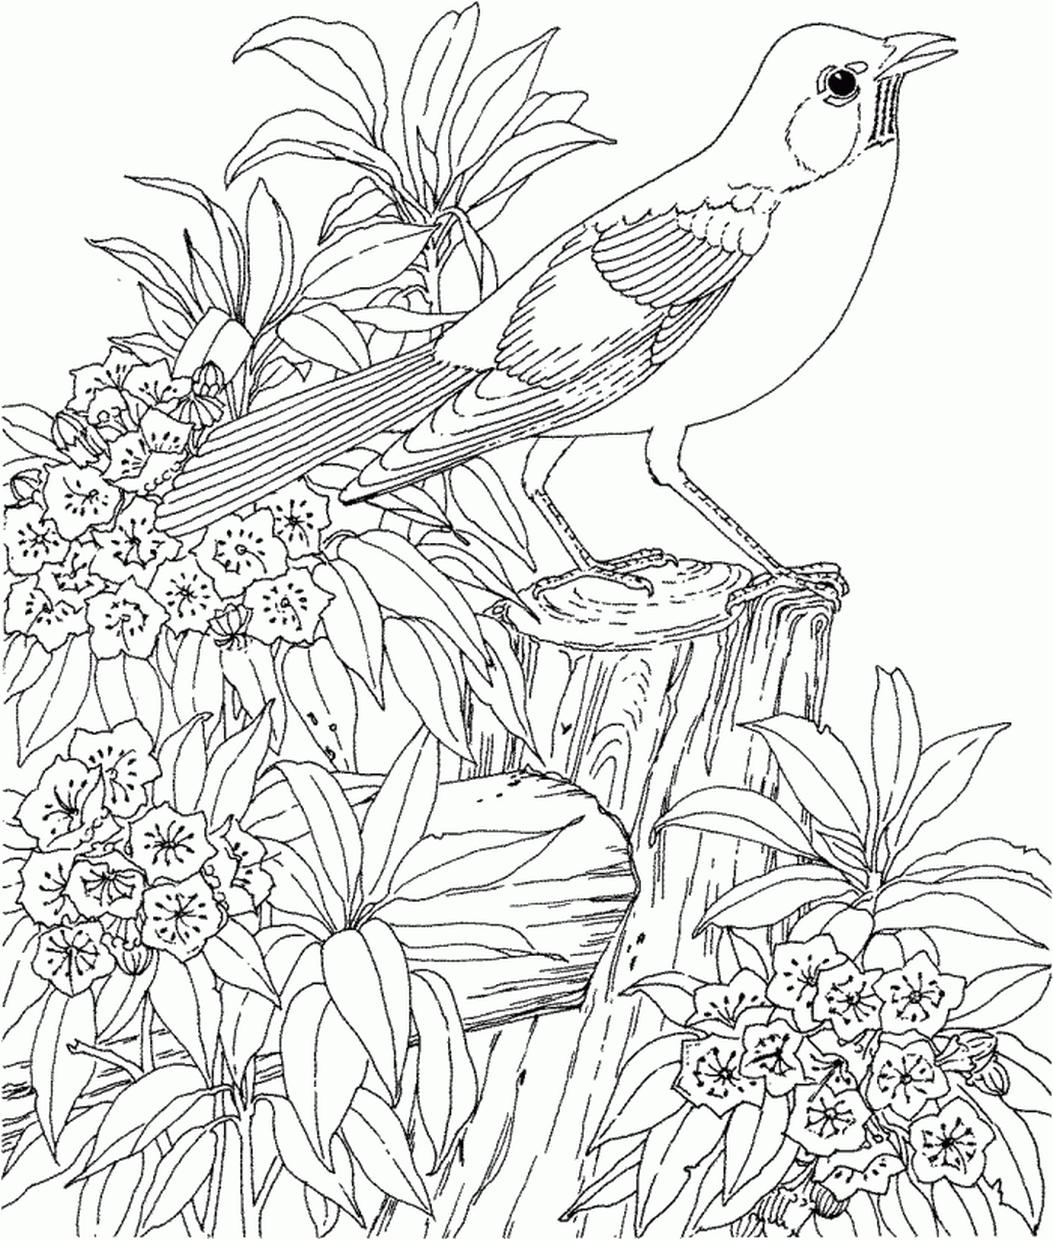 Get This Hard Coloring Pages Printable Free Realistic Bird Image !